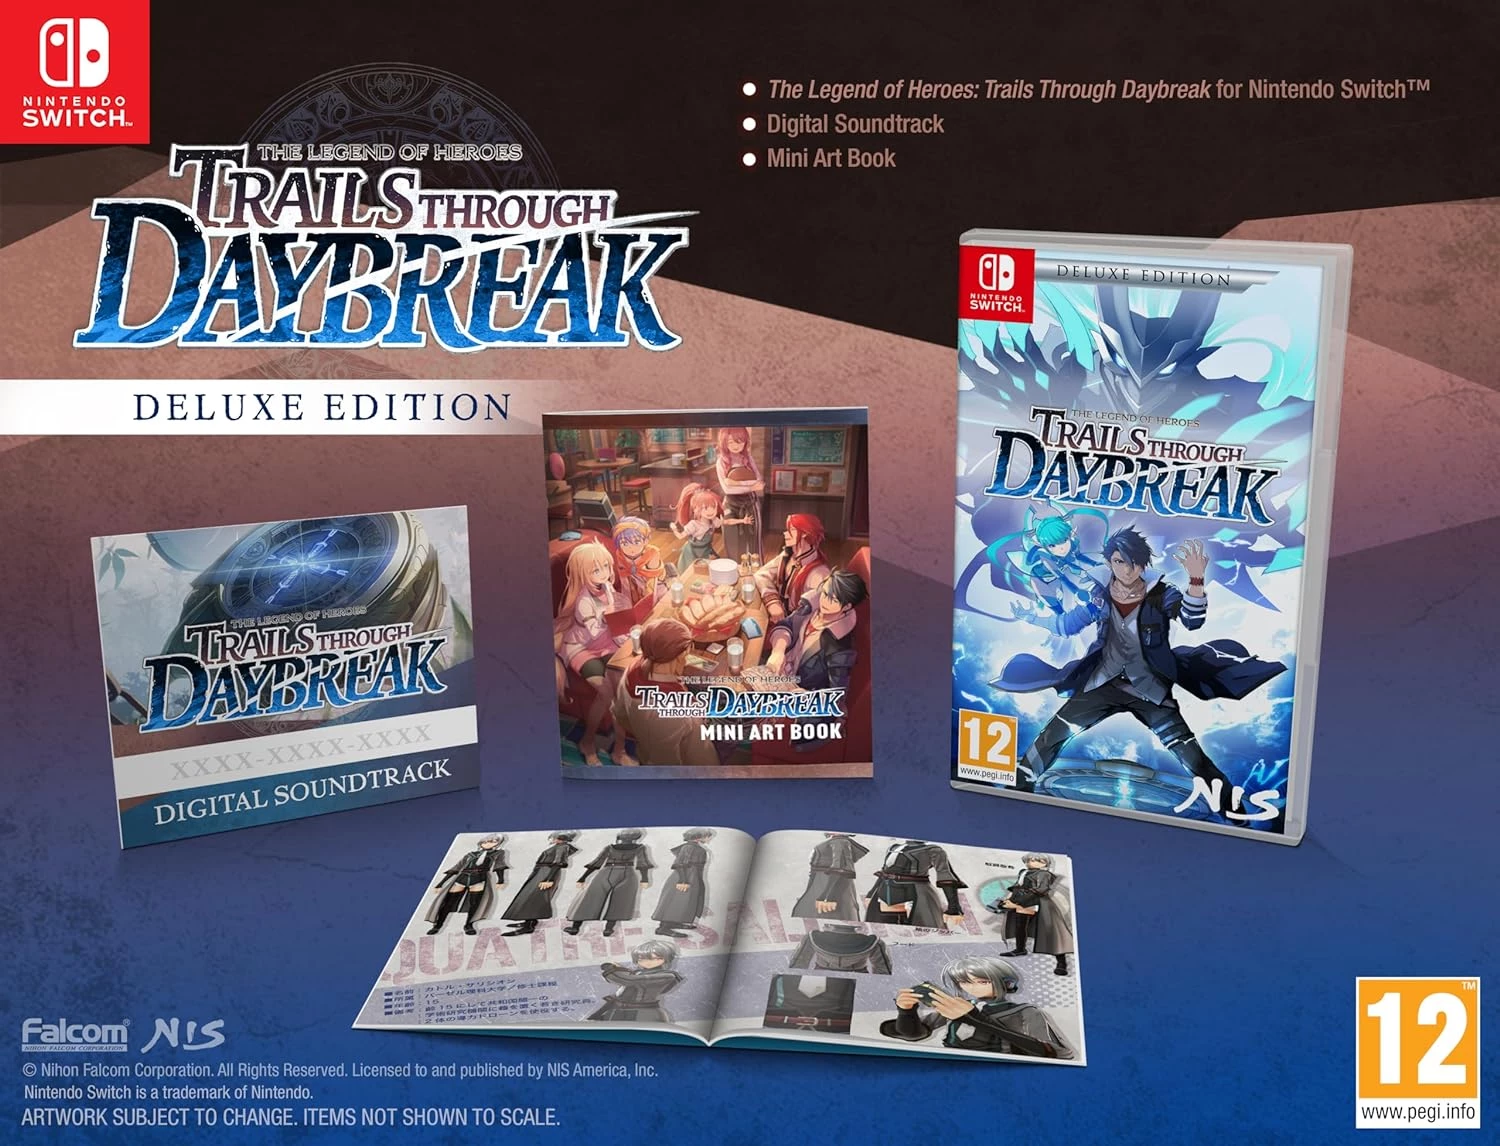 The Legend of Heroes: Trails Through Daybreak - Deluxe Edition (Switch), NIS America